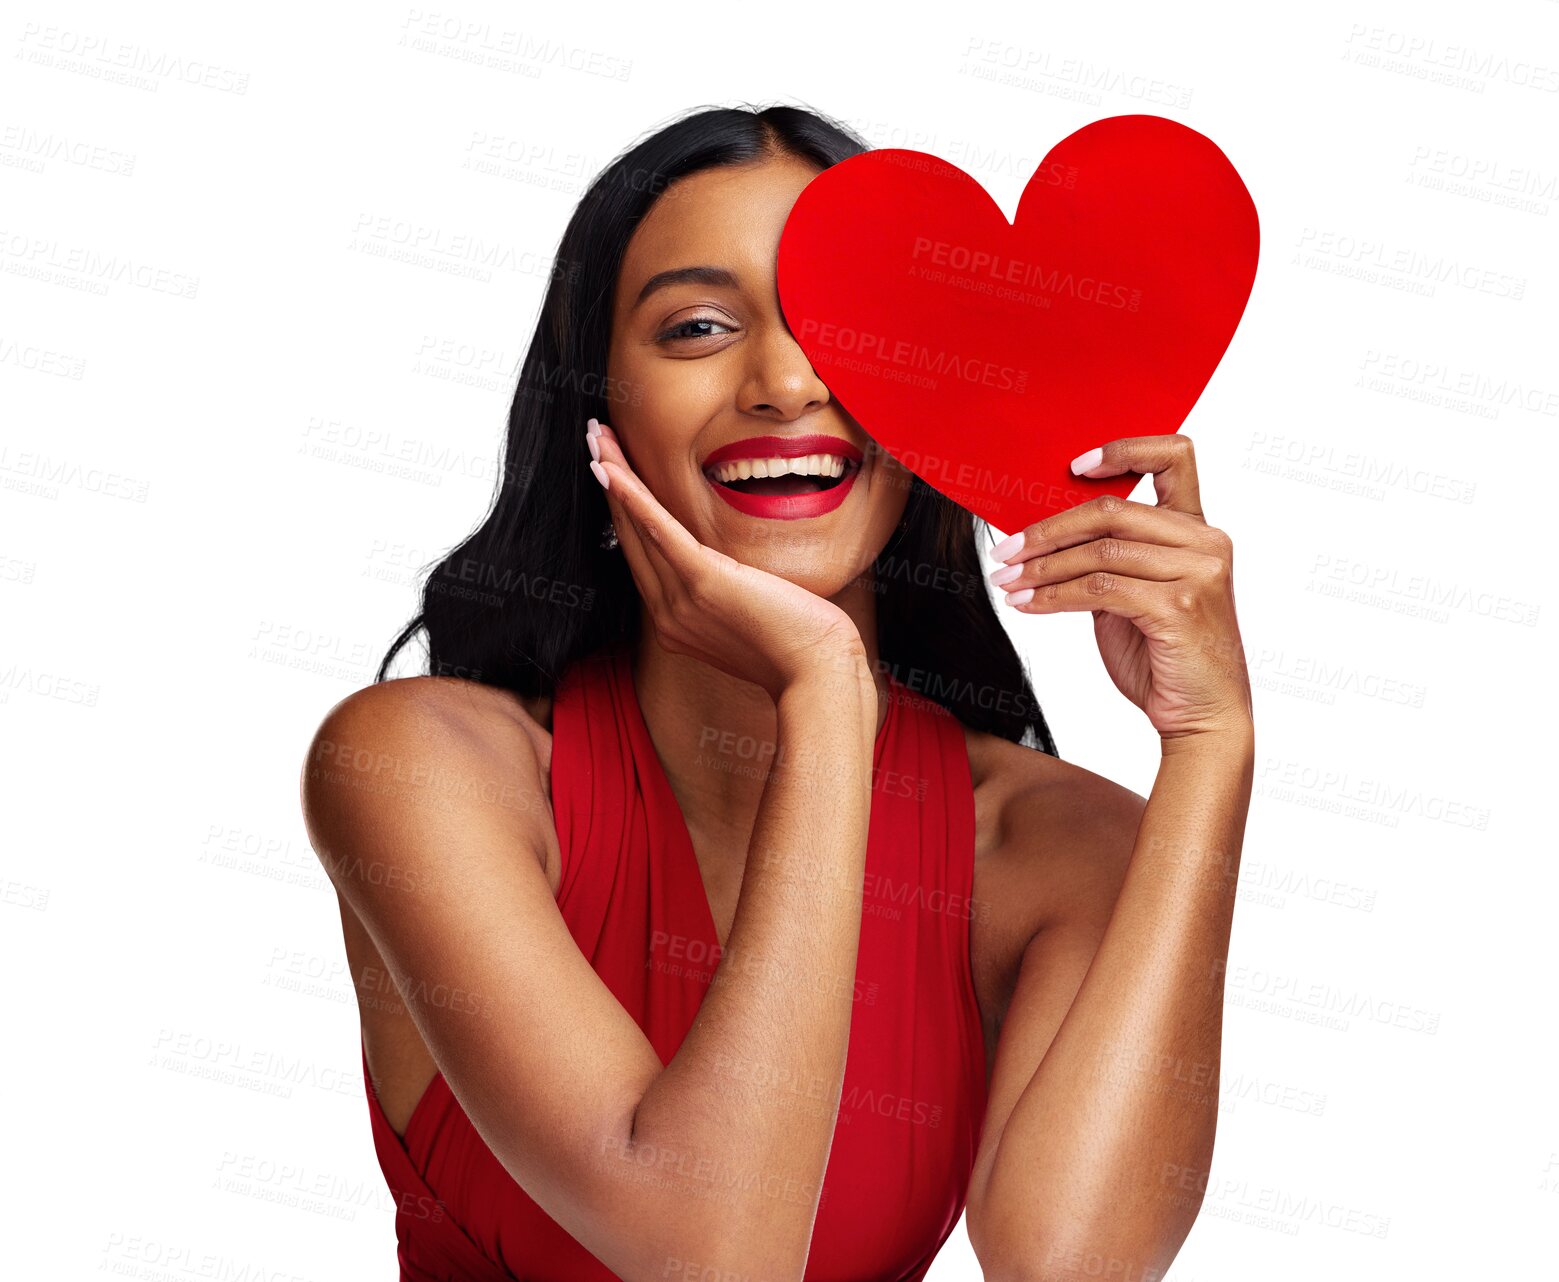 Buy stock photo Portrait, heart and woman with card on valentines day isolated on png transparent background for love. Red lips, emoji and happy young female holding a shape or symbol of affection, care or sign